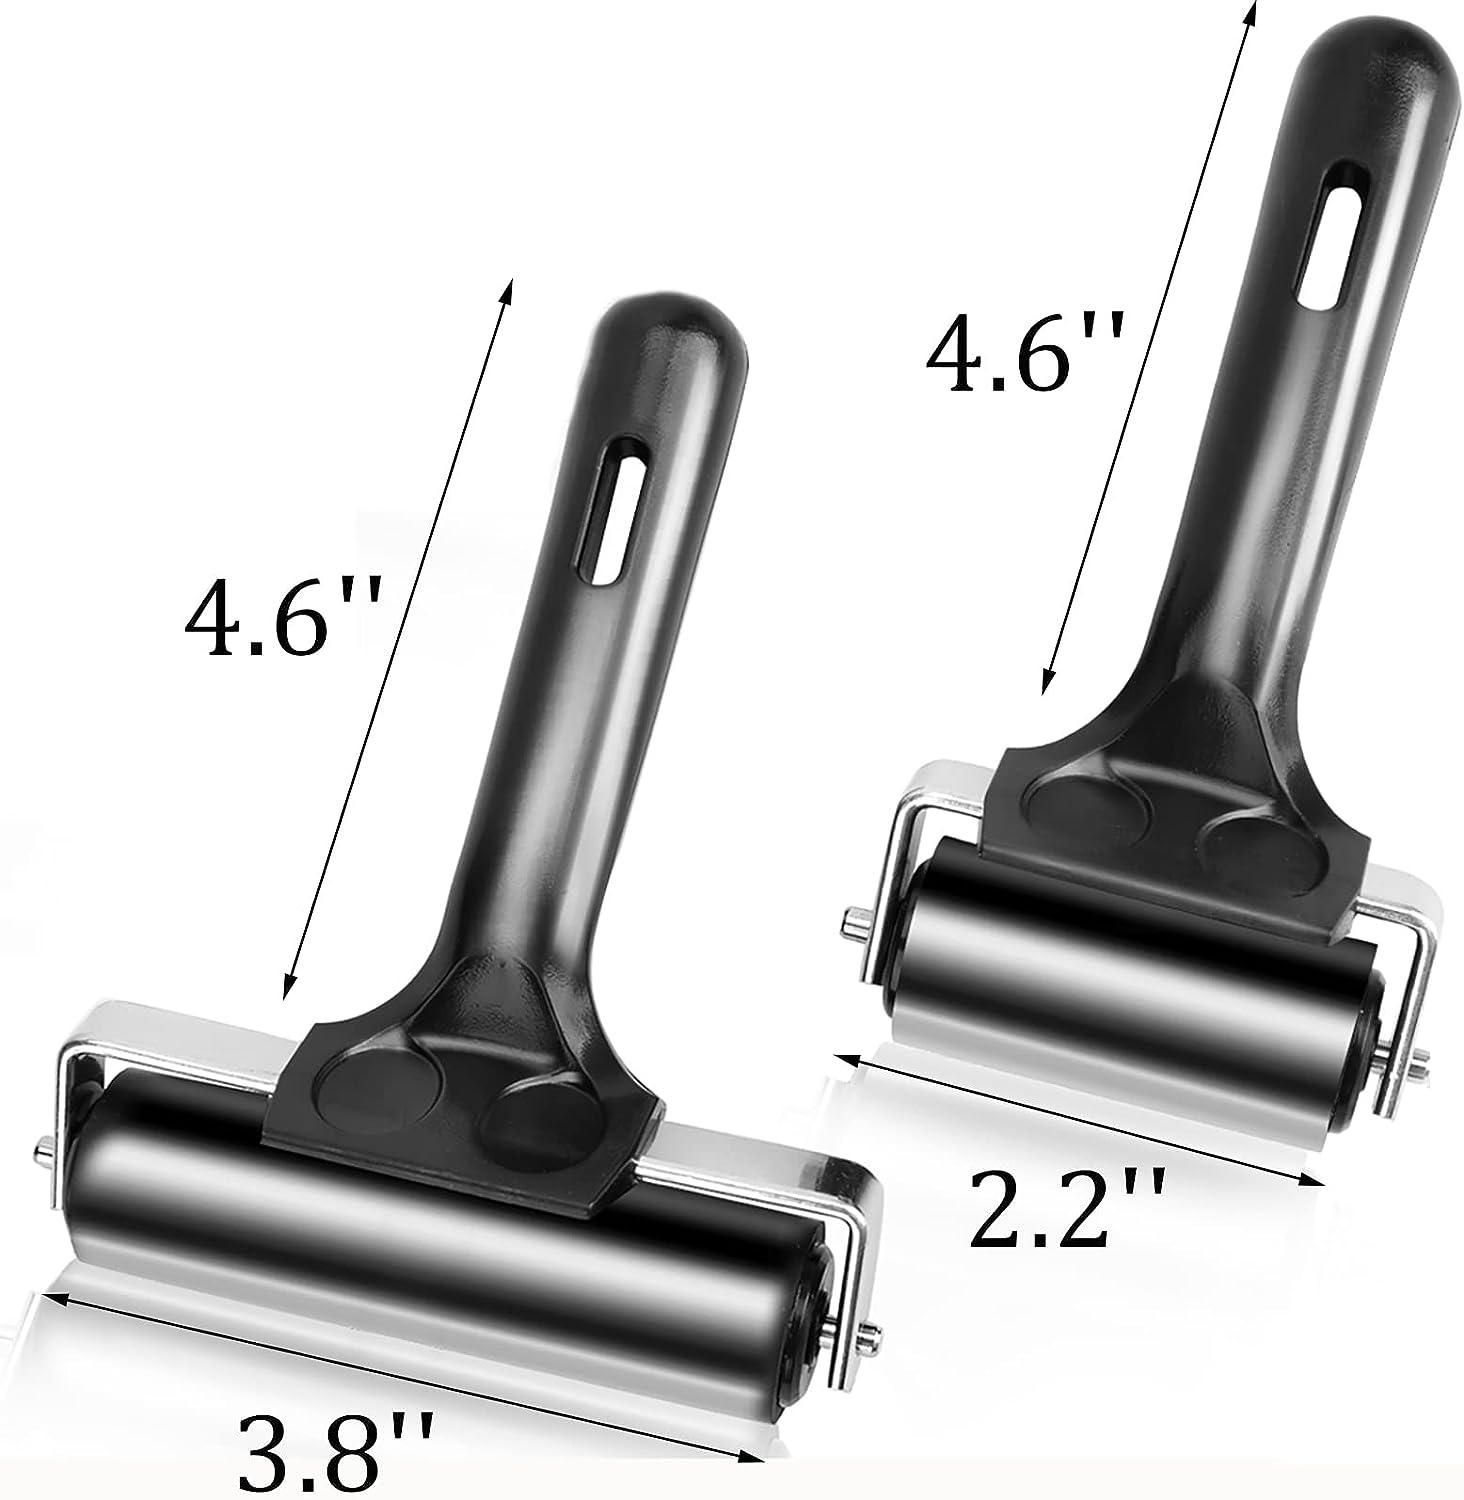 2pcs Rubber Roller Brayer for Craft Printmaking Stamping, 4 & 3 inch - Black